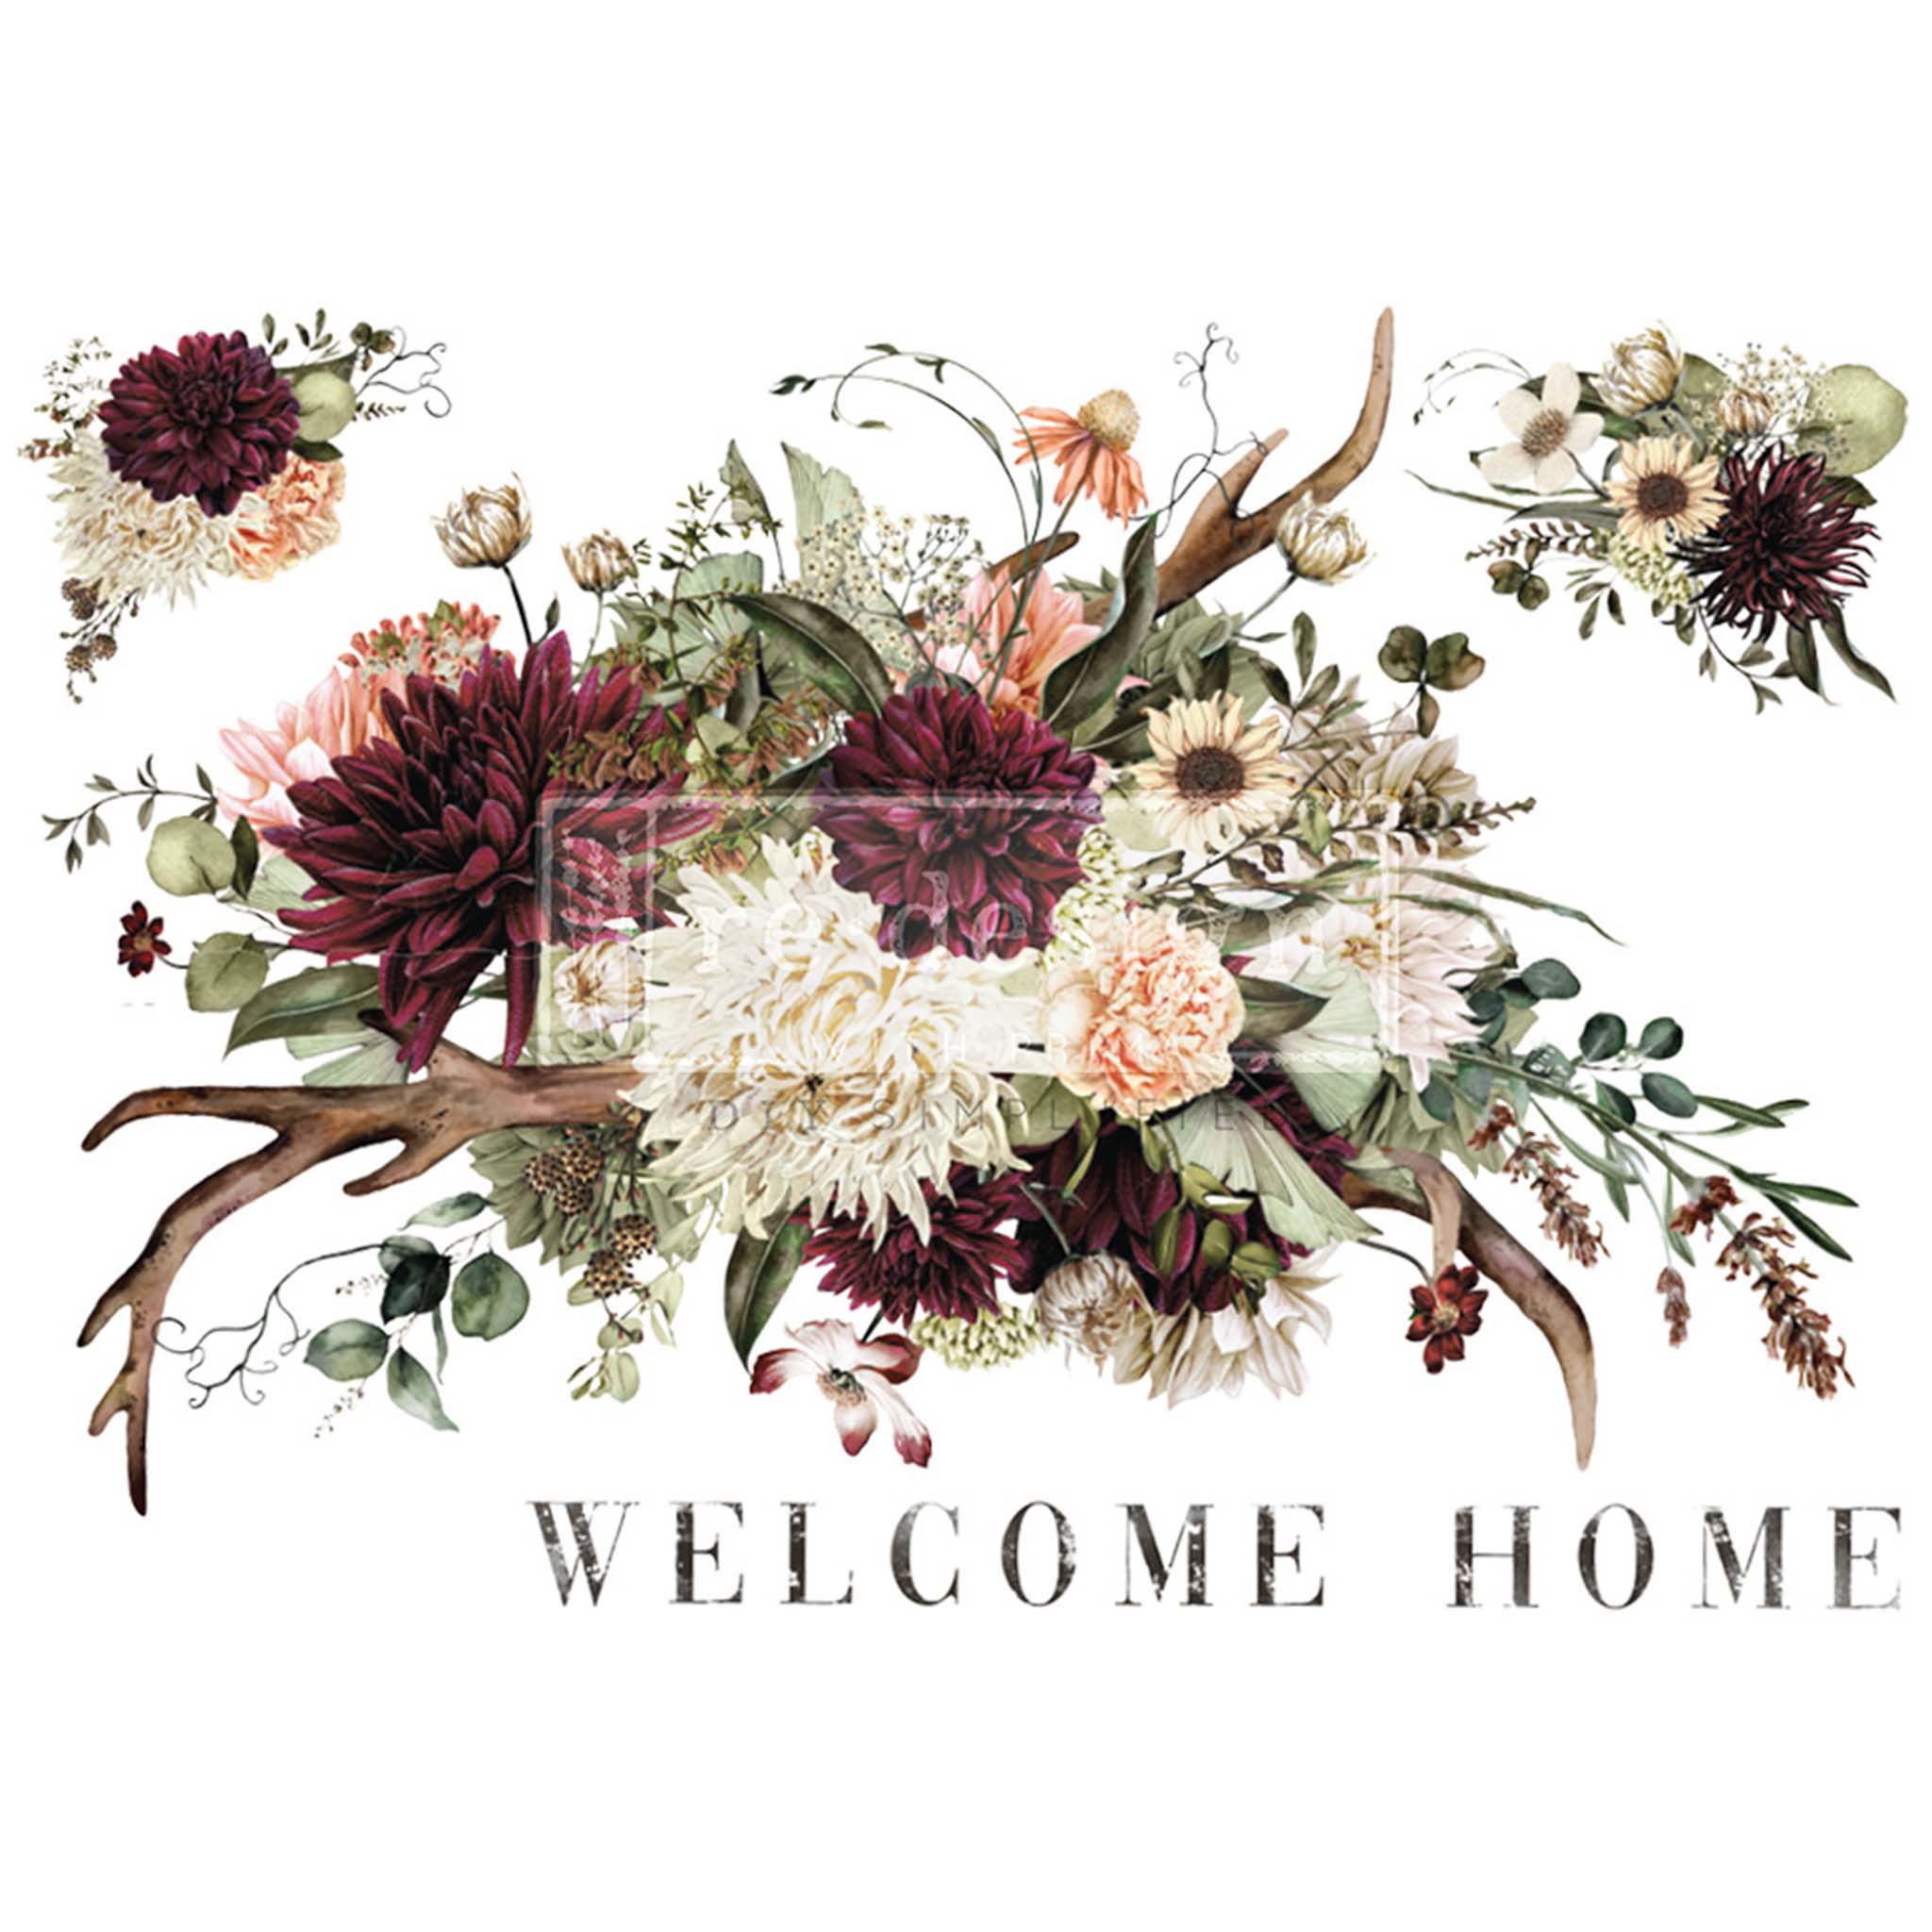 A rub-on transfer of a fall floral arrangement in beautiful shades of burgundy, cream, and blush surrounded by lush greenery and antlers, and the words 'Welcome Home'.